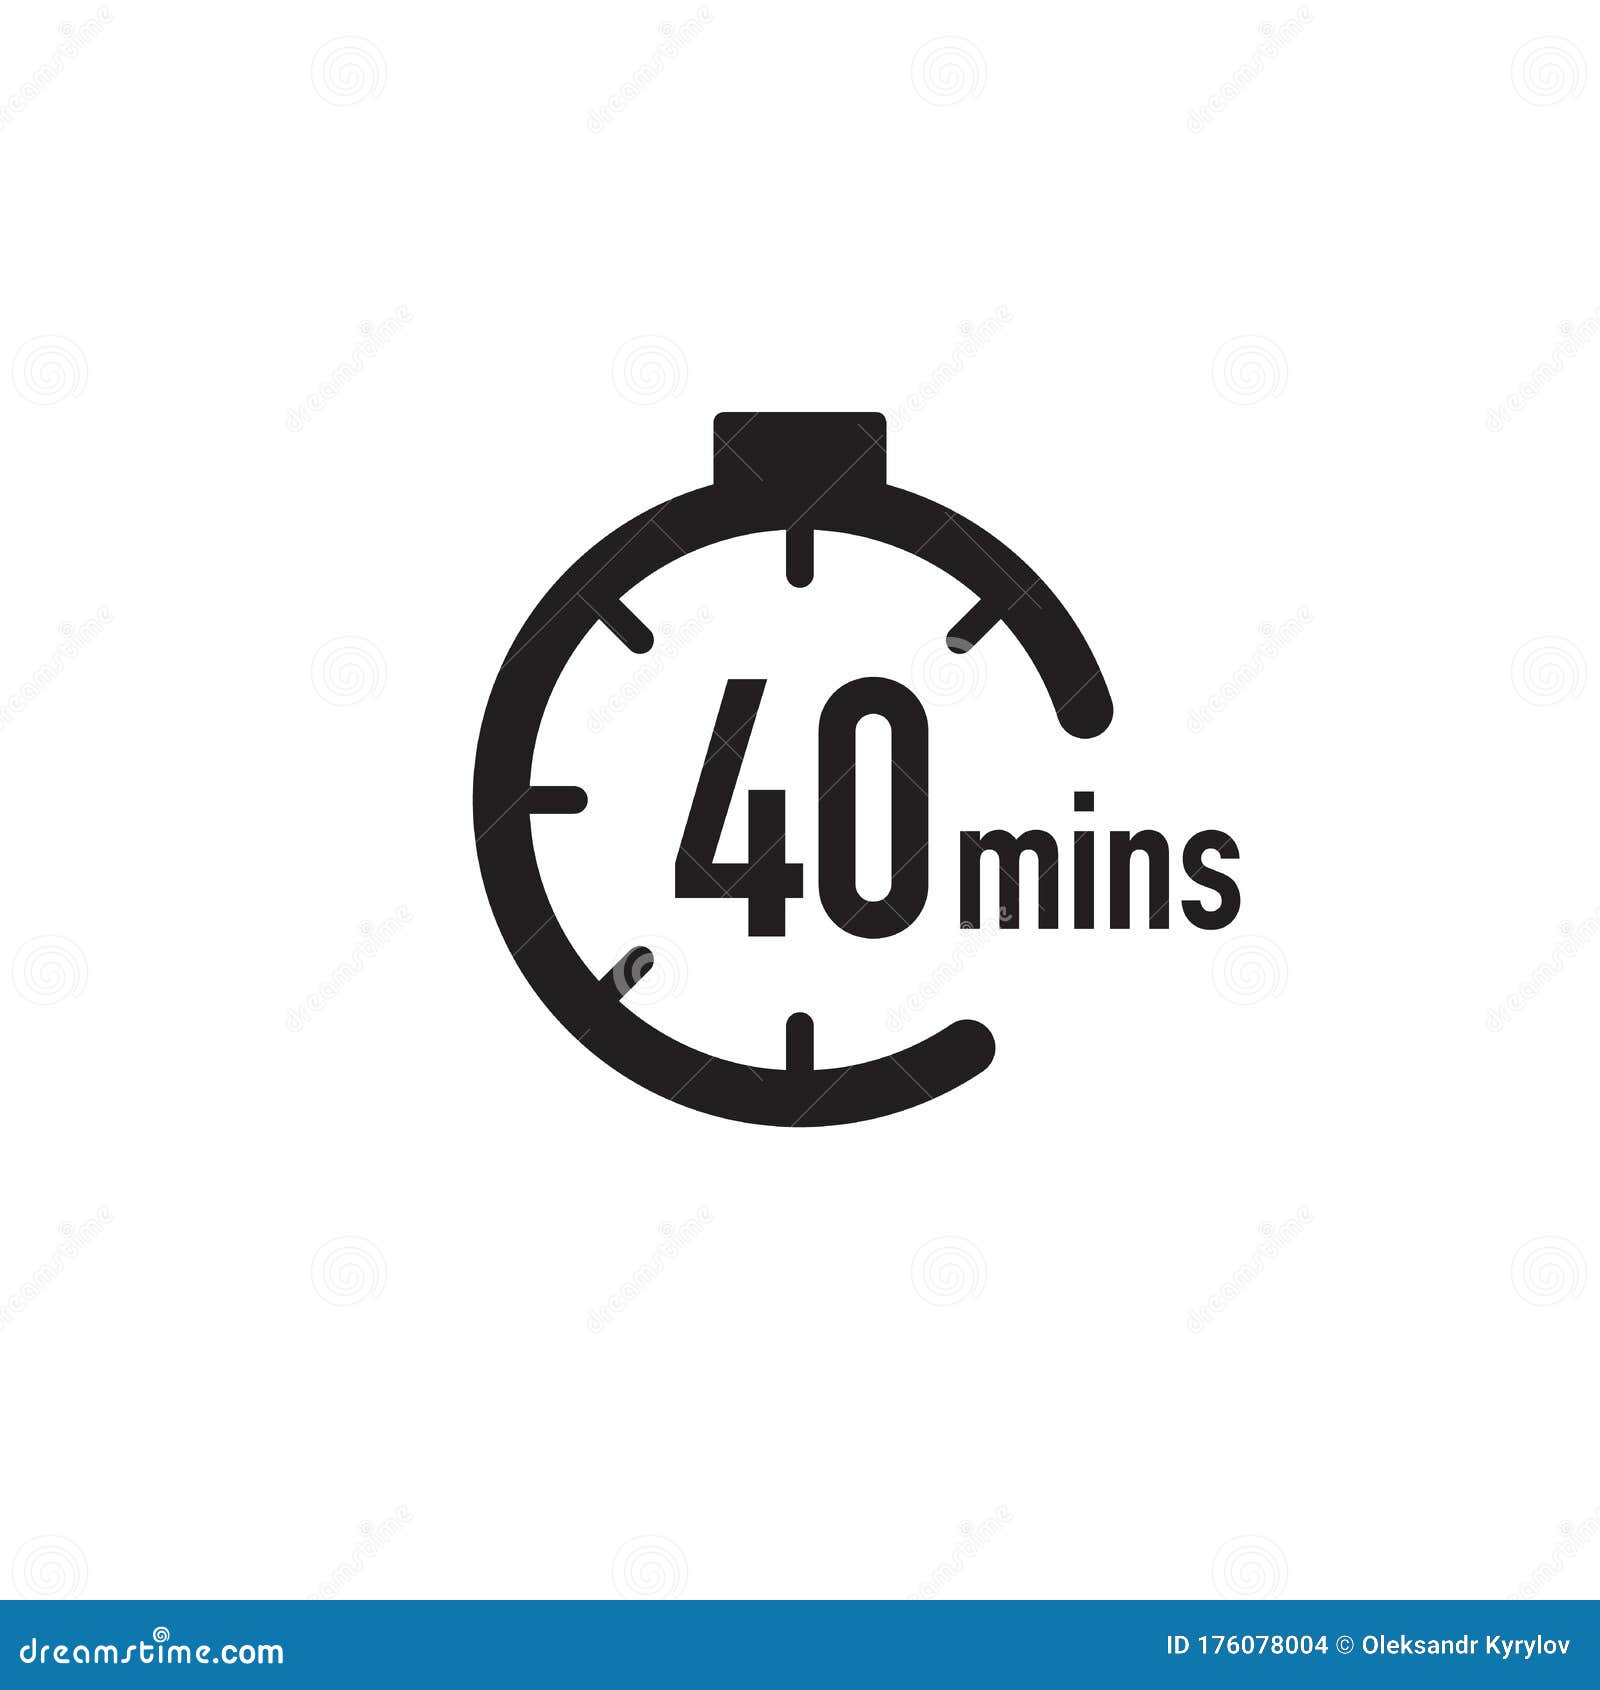 6 hour 40 minute timer